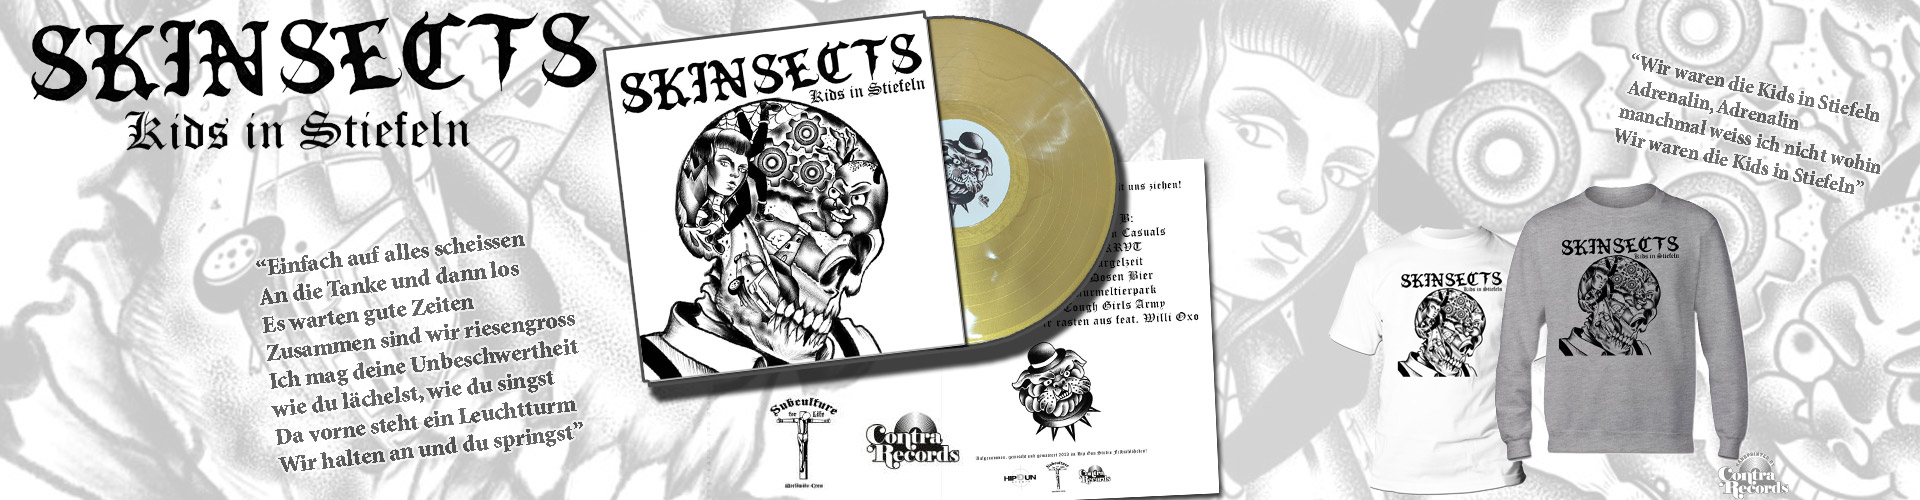 skinsects